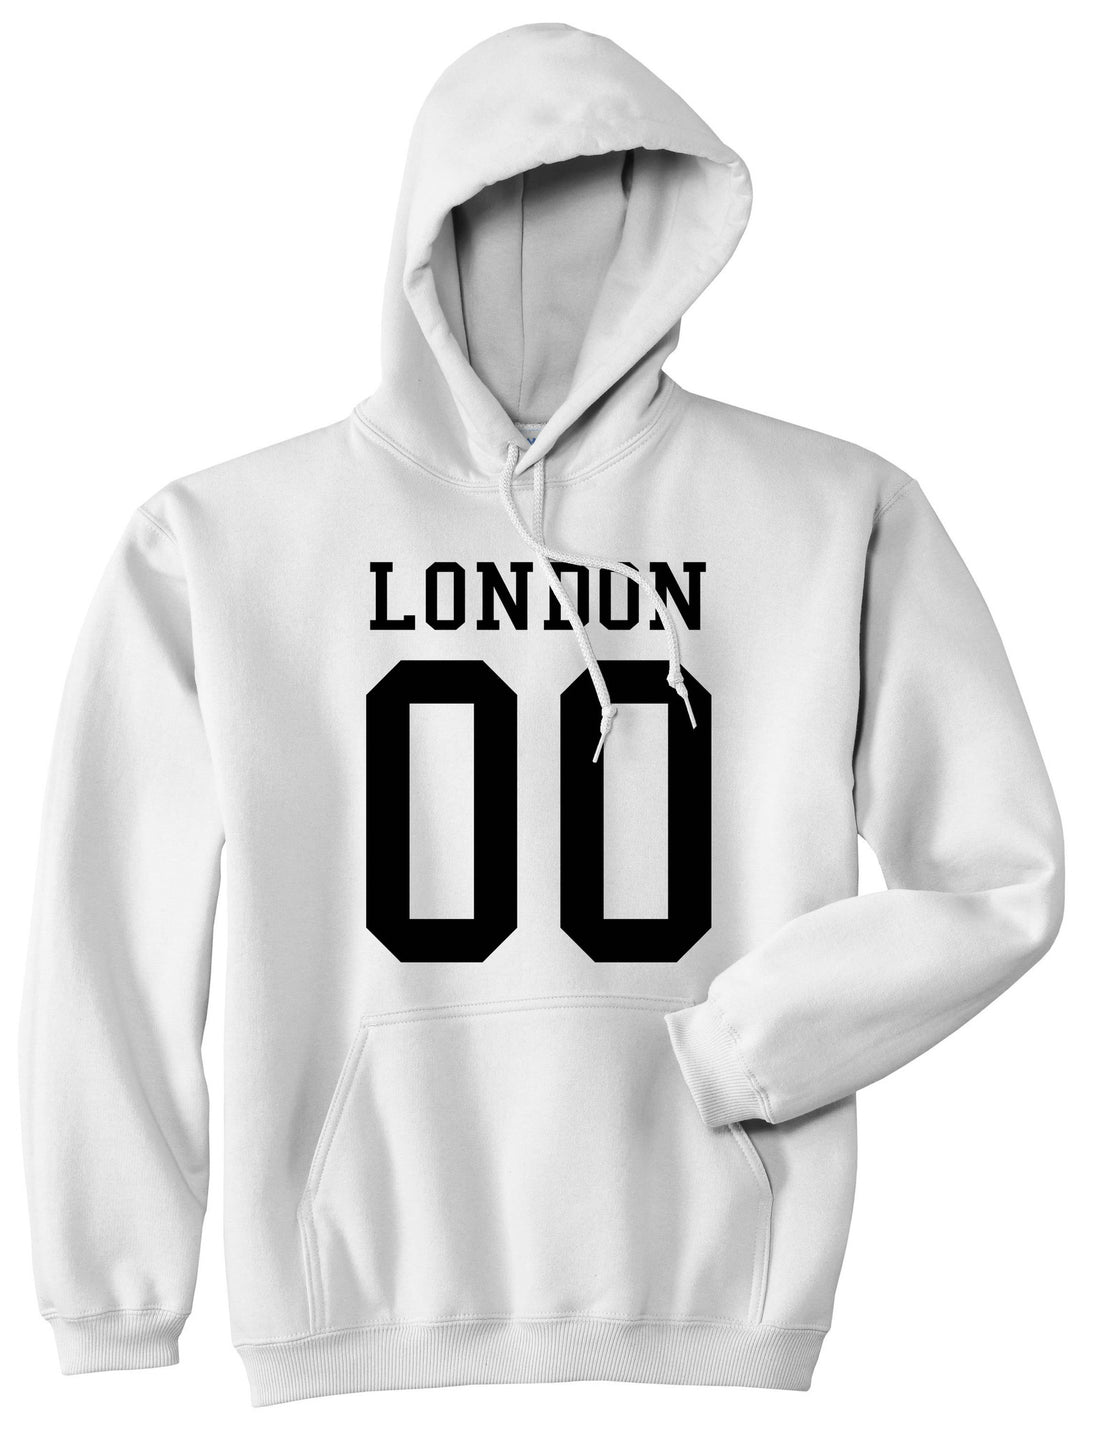 London Team 00 Jersey Pullover Hoodie in White By Kings Of NY